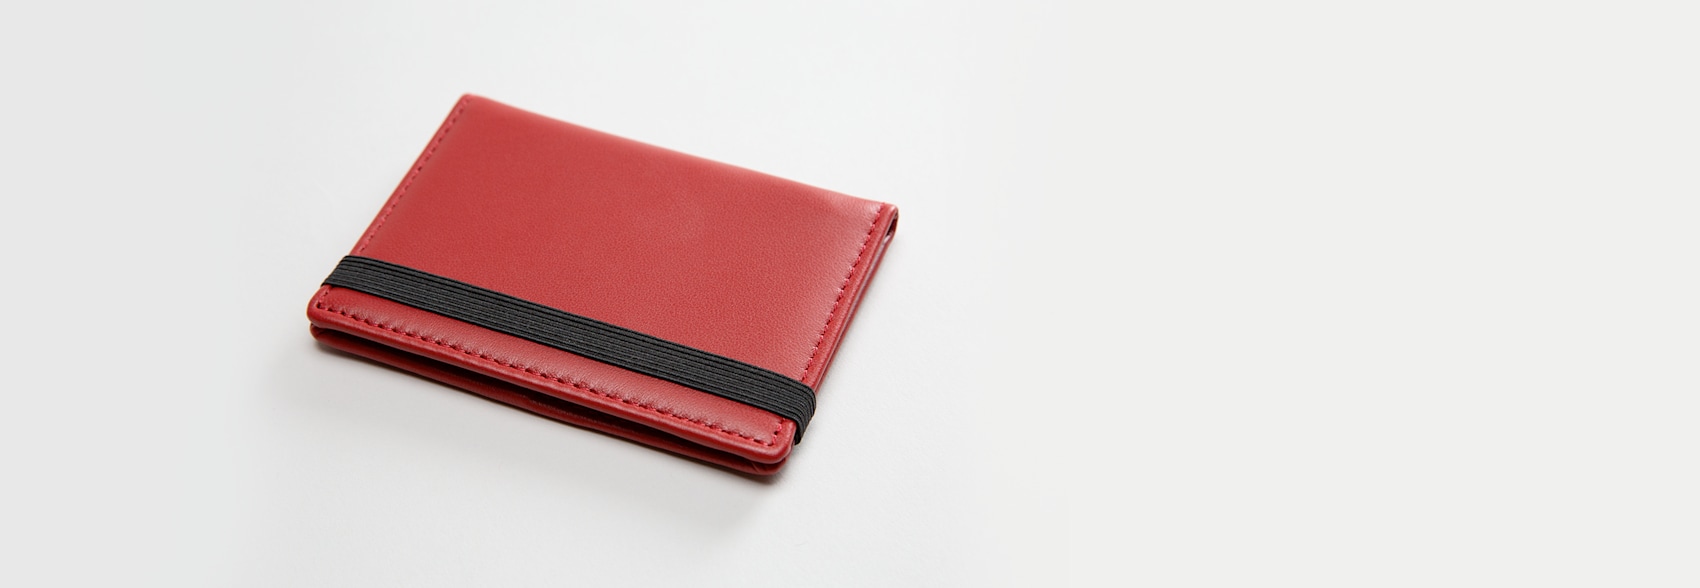 Folded Red Leather Business Card Holders 3